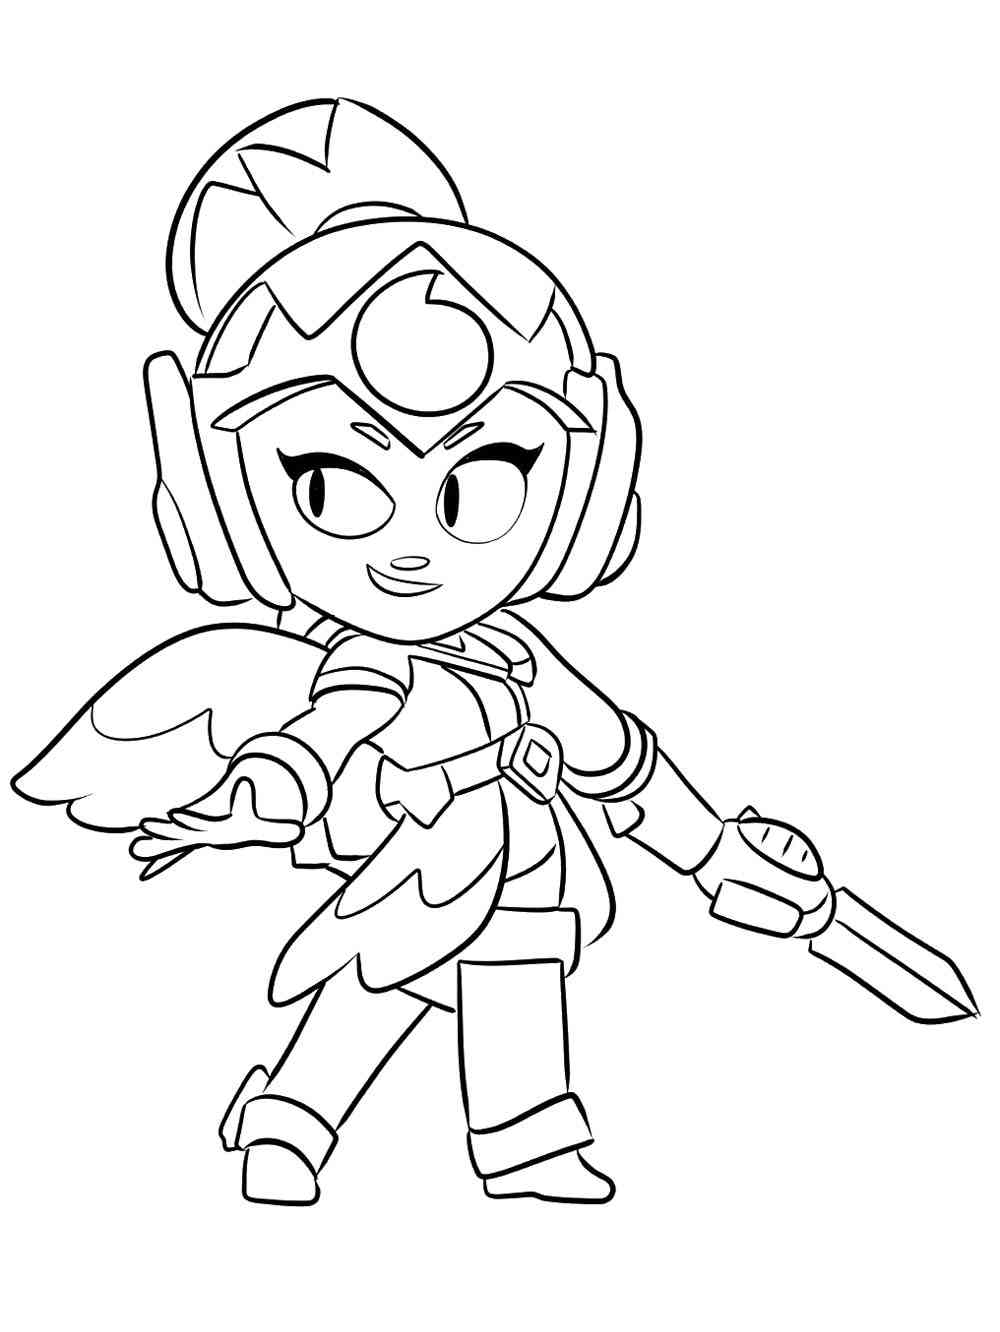 Janet from Brawl Stars coloring pages